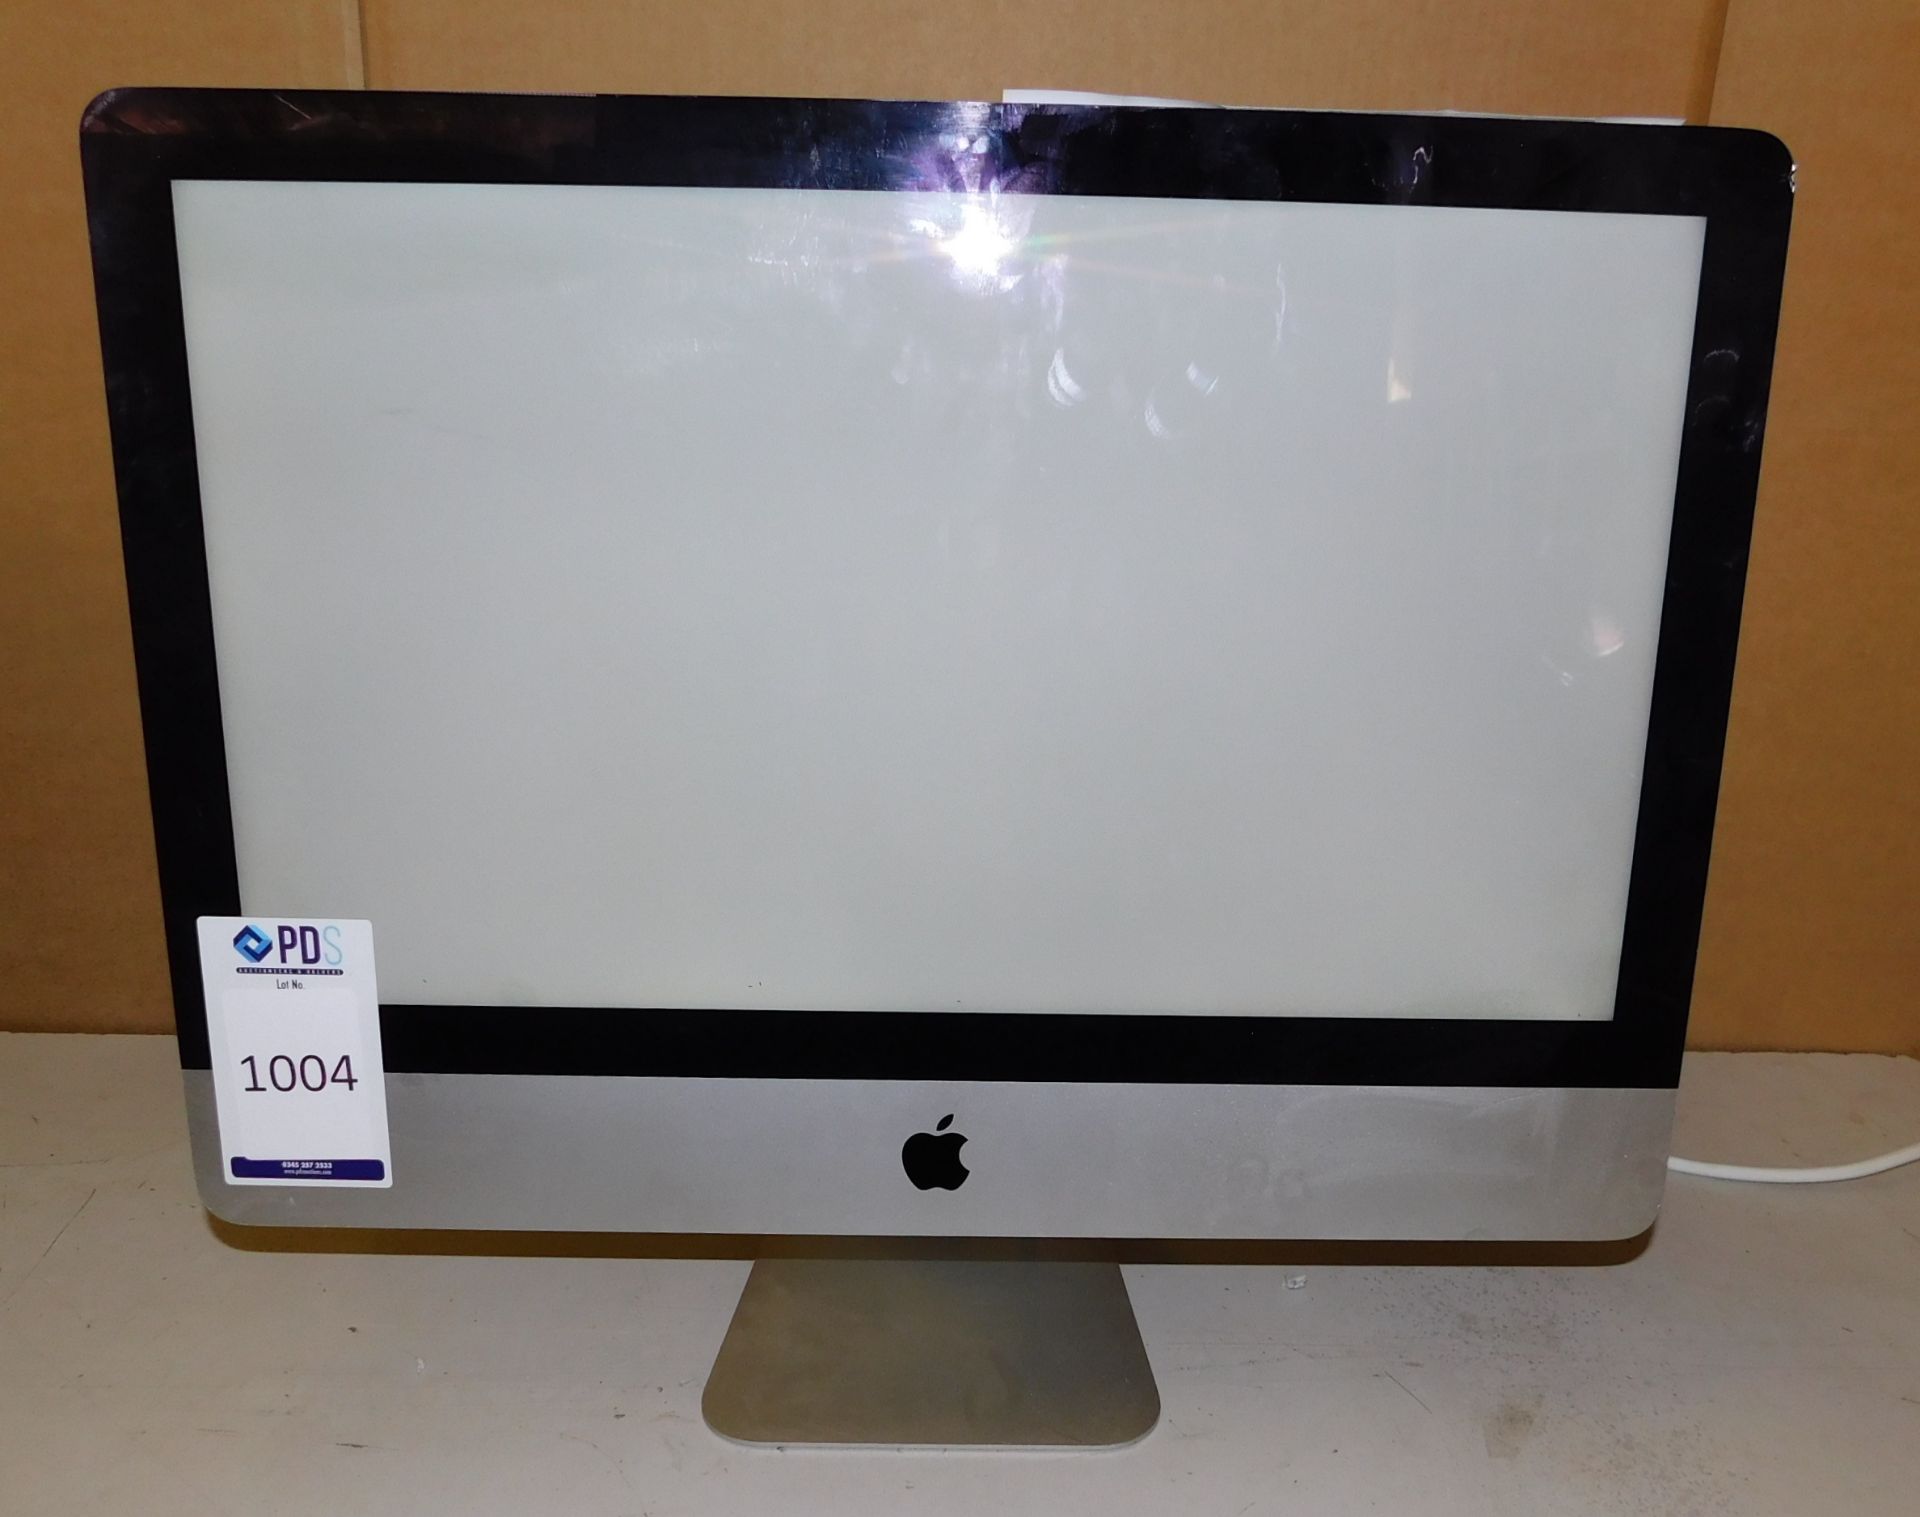 Apple iMac A1418, Serial Number C02JT2JFDNCT, i5 2.9GHz, 8GB RAM, 1TB HDD, No OS Installed, No Power